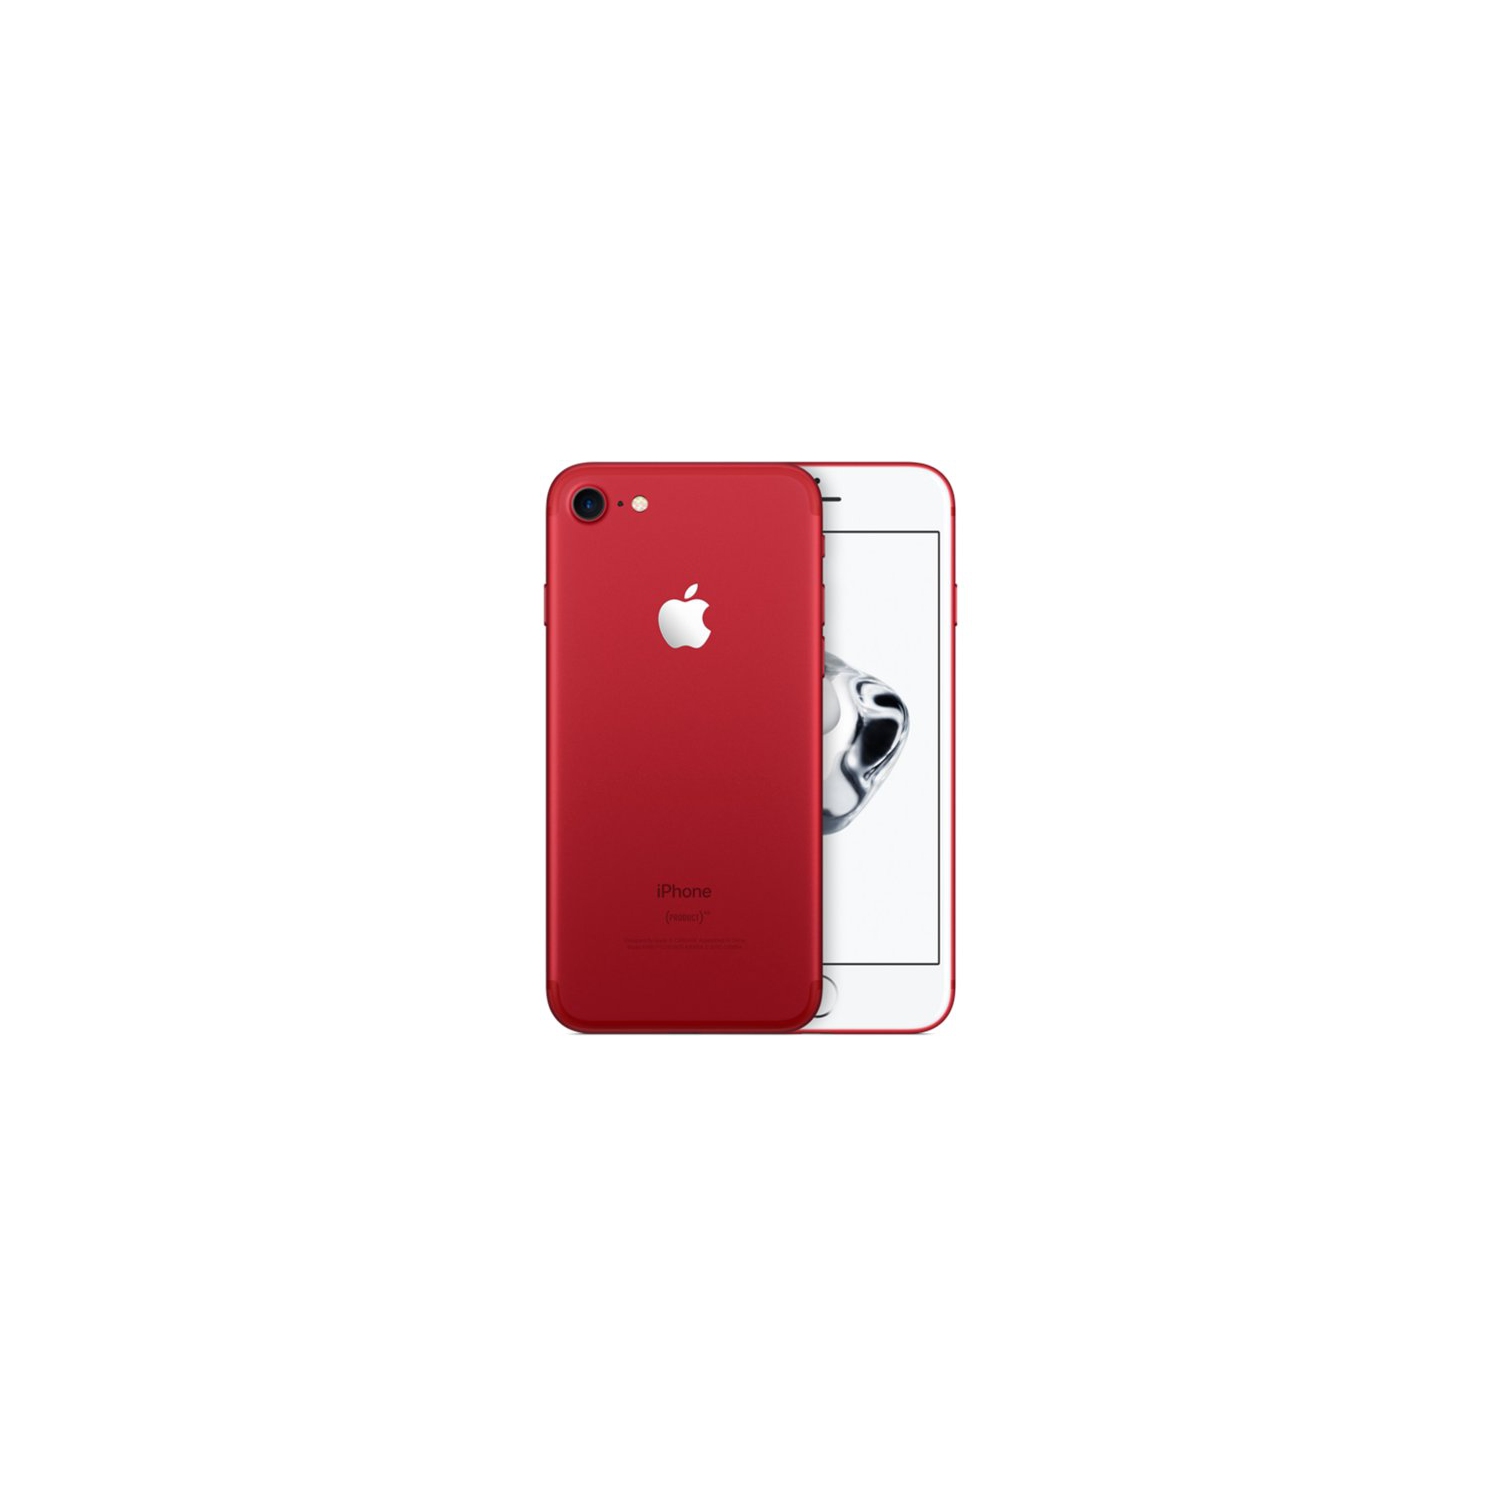 Refurbished (Excellent) - Apple iPhone 7 32GB Smartphone - (Product)RED - Unlocked - Certified Refurbished